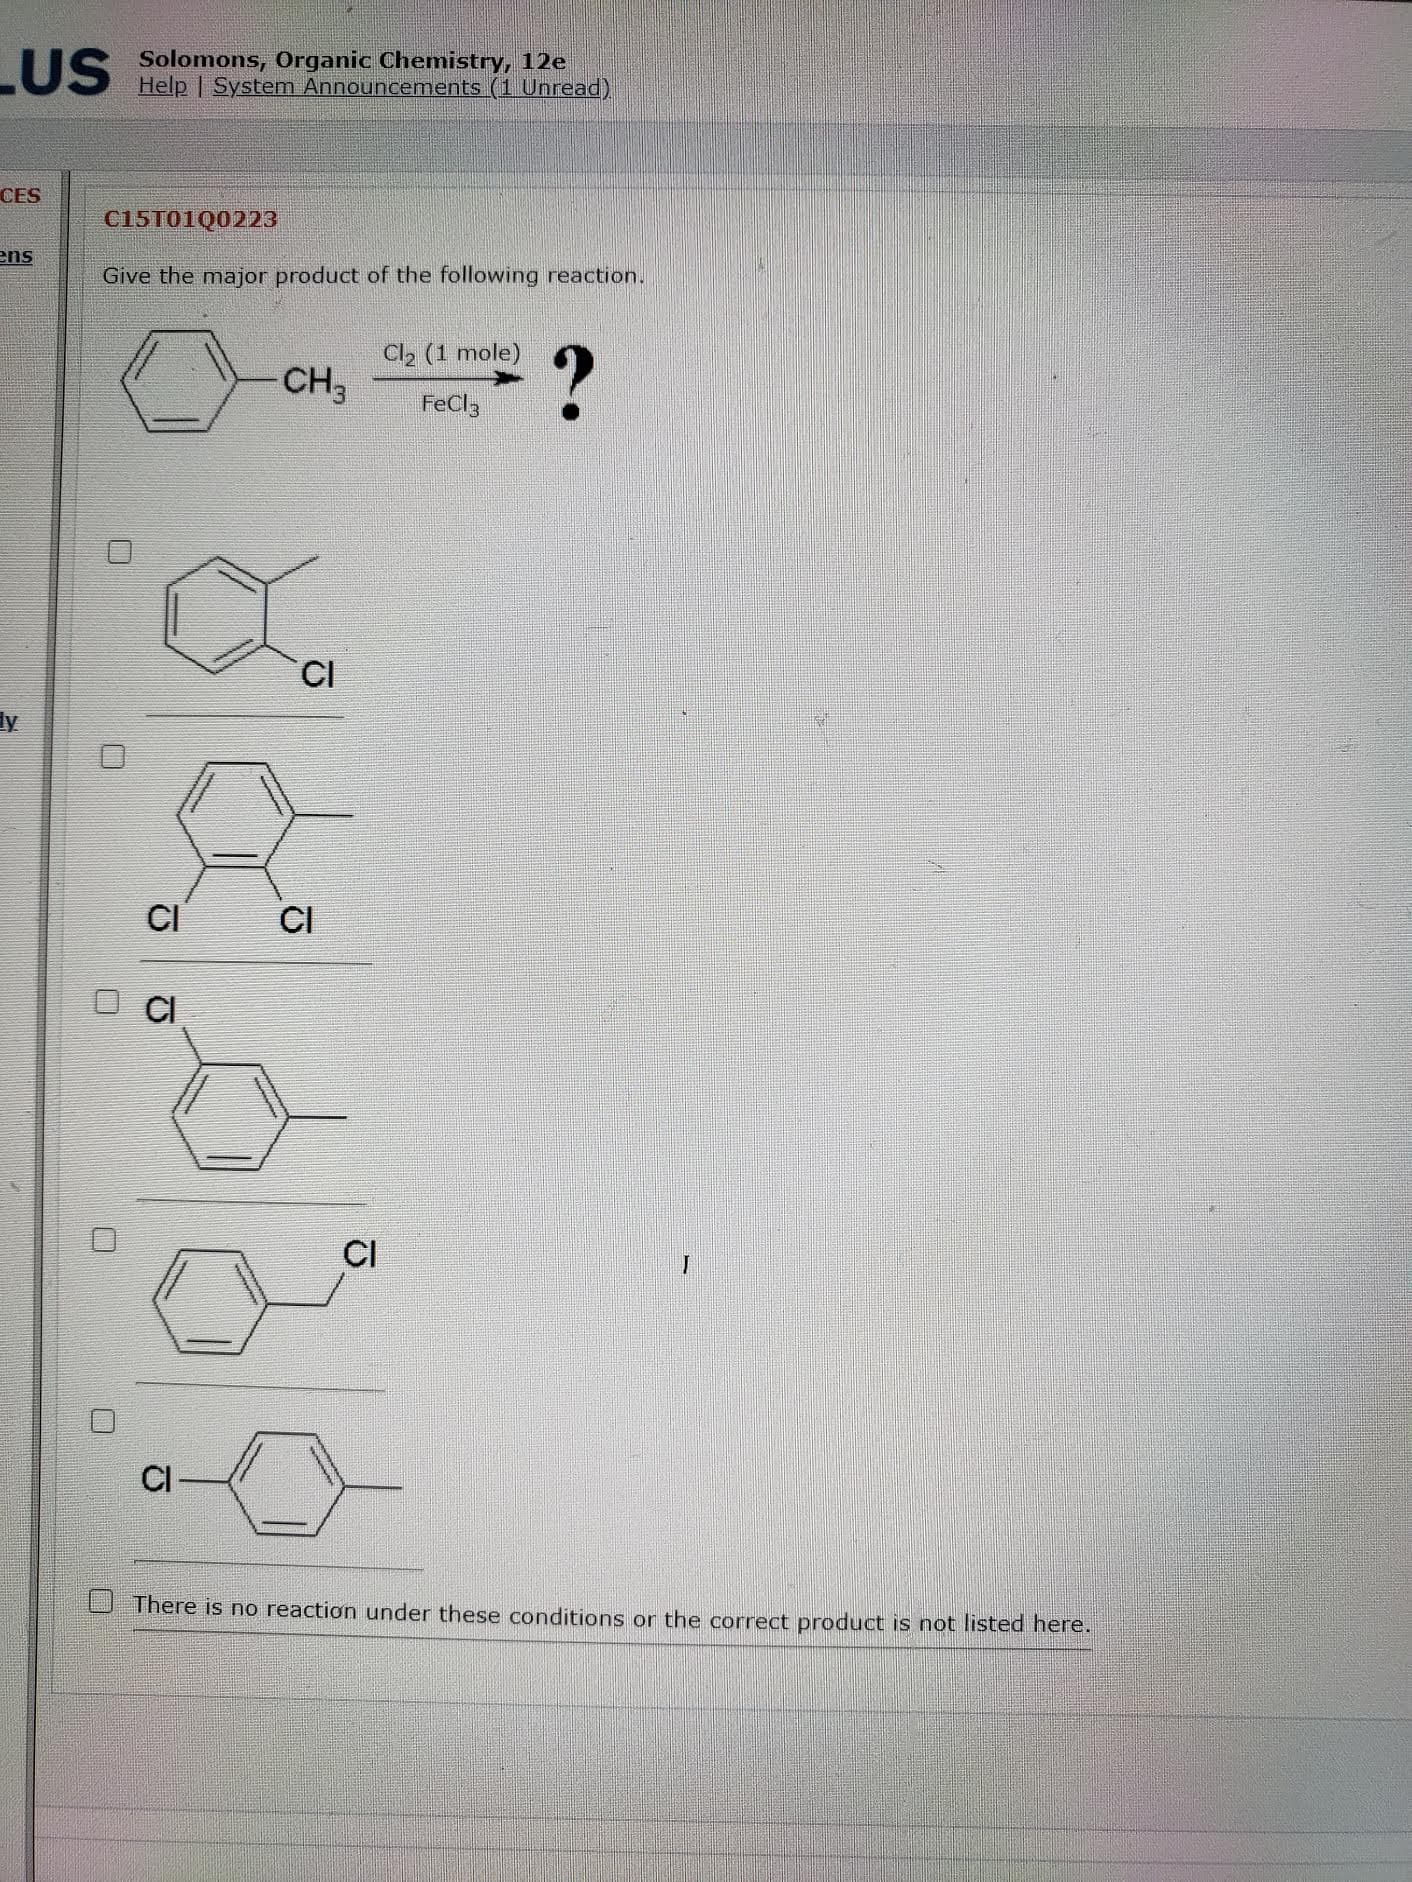 Give the major product of the following reaction,
Cl2 (1 mole)
CH3
FeCl3
CI
CI
CI
CI
CI
CI
There is no reaction under these conditions or the correct product is not listed here.
